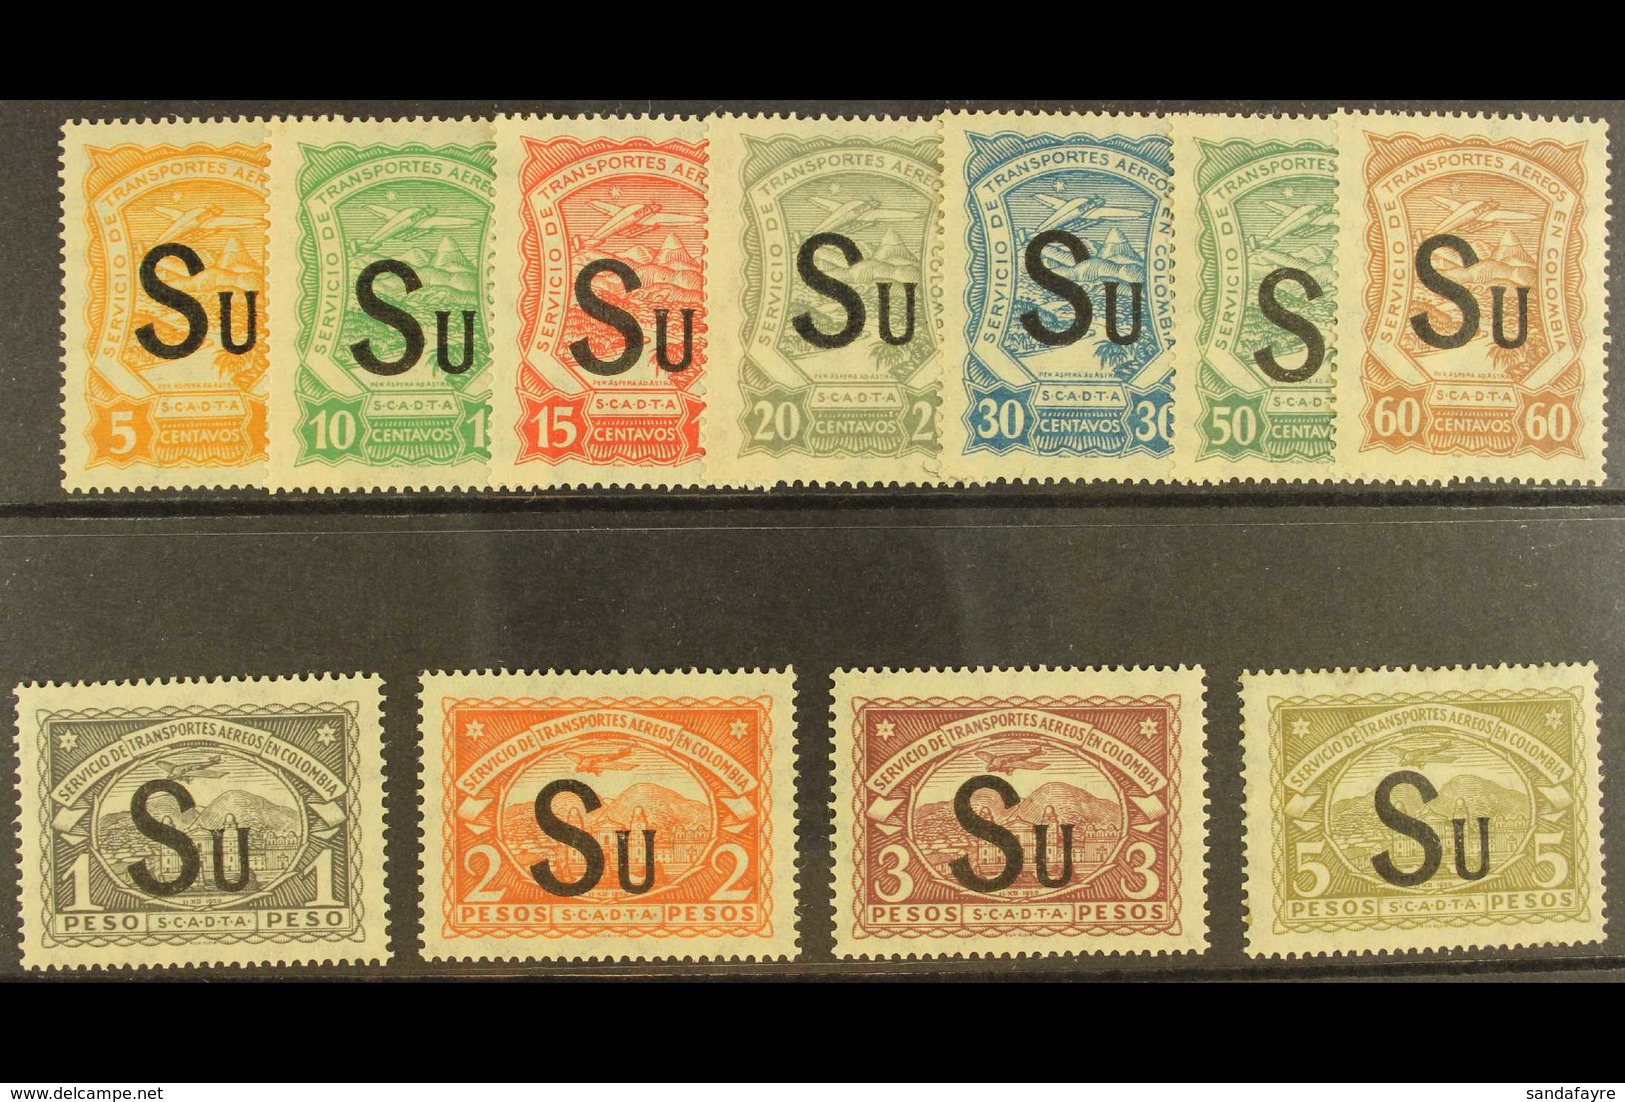 PRIVATE AIRS - SCADTA 1924 (10 Mar) "SU" Overprinted (for Sweden) Complete Set (SG 26M/36M, Scott CLSU1/11), Very Fine M - Colombie